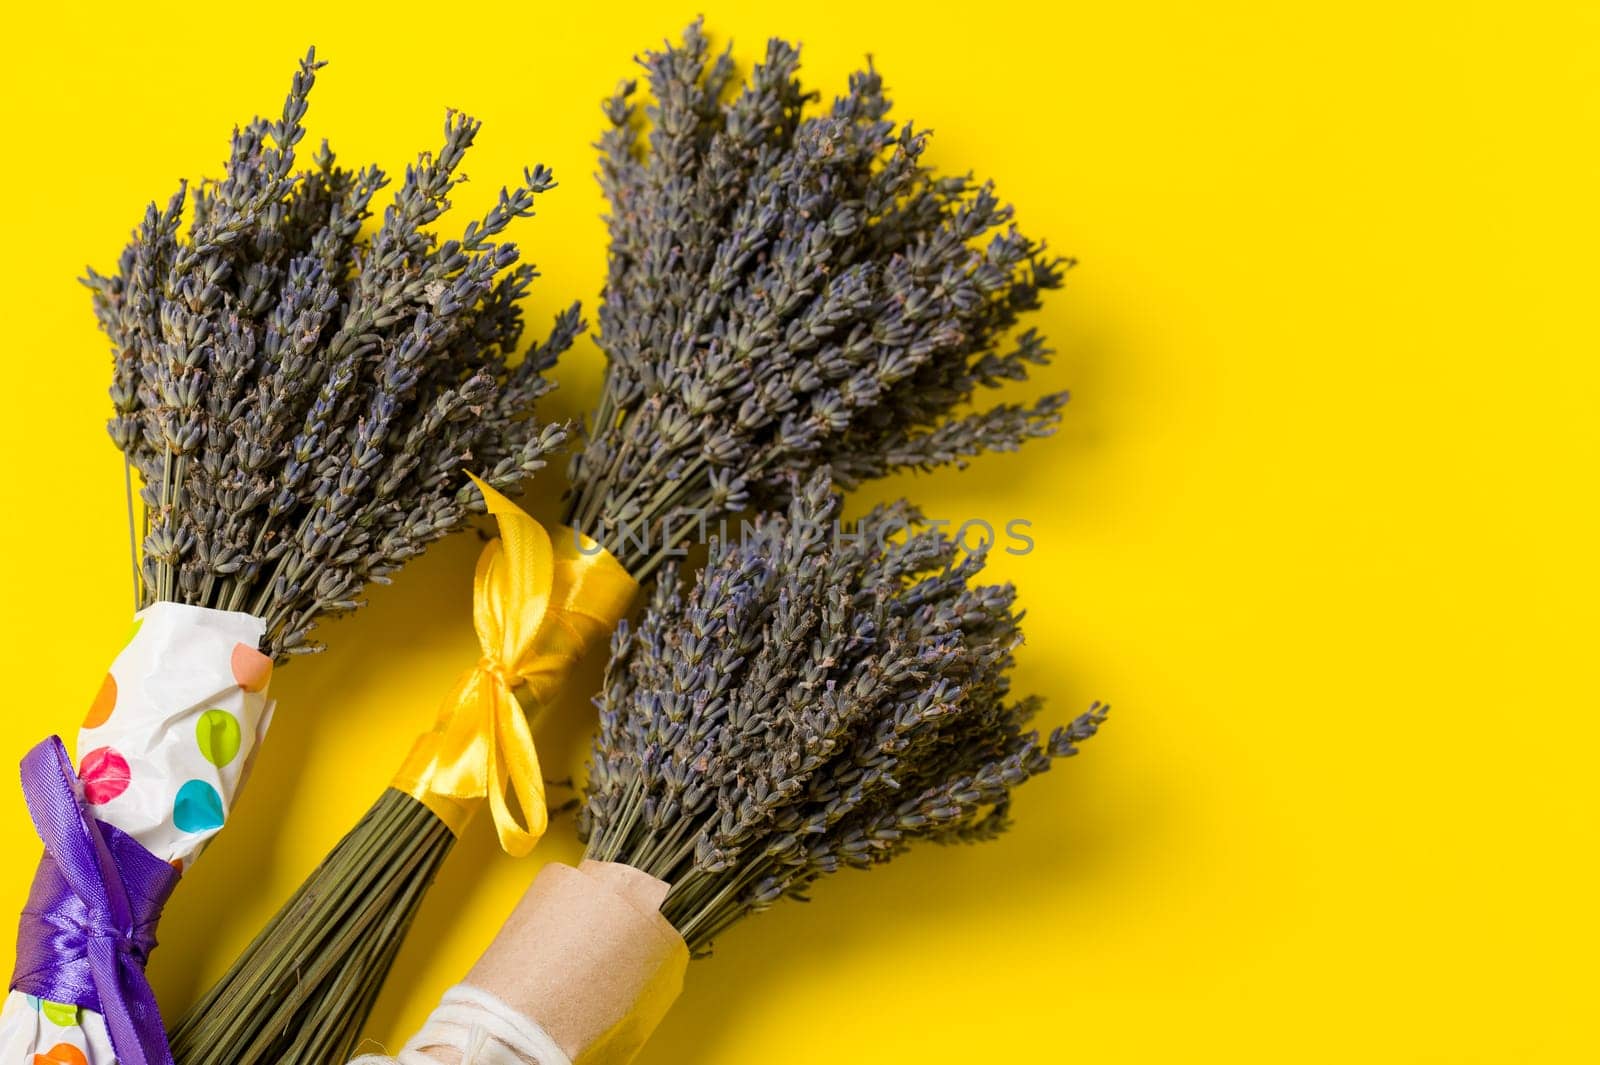 Three bouquets of dried lavender on a yellow background. by Niko_Cingaryuk